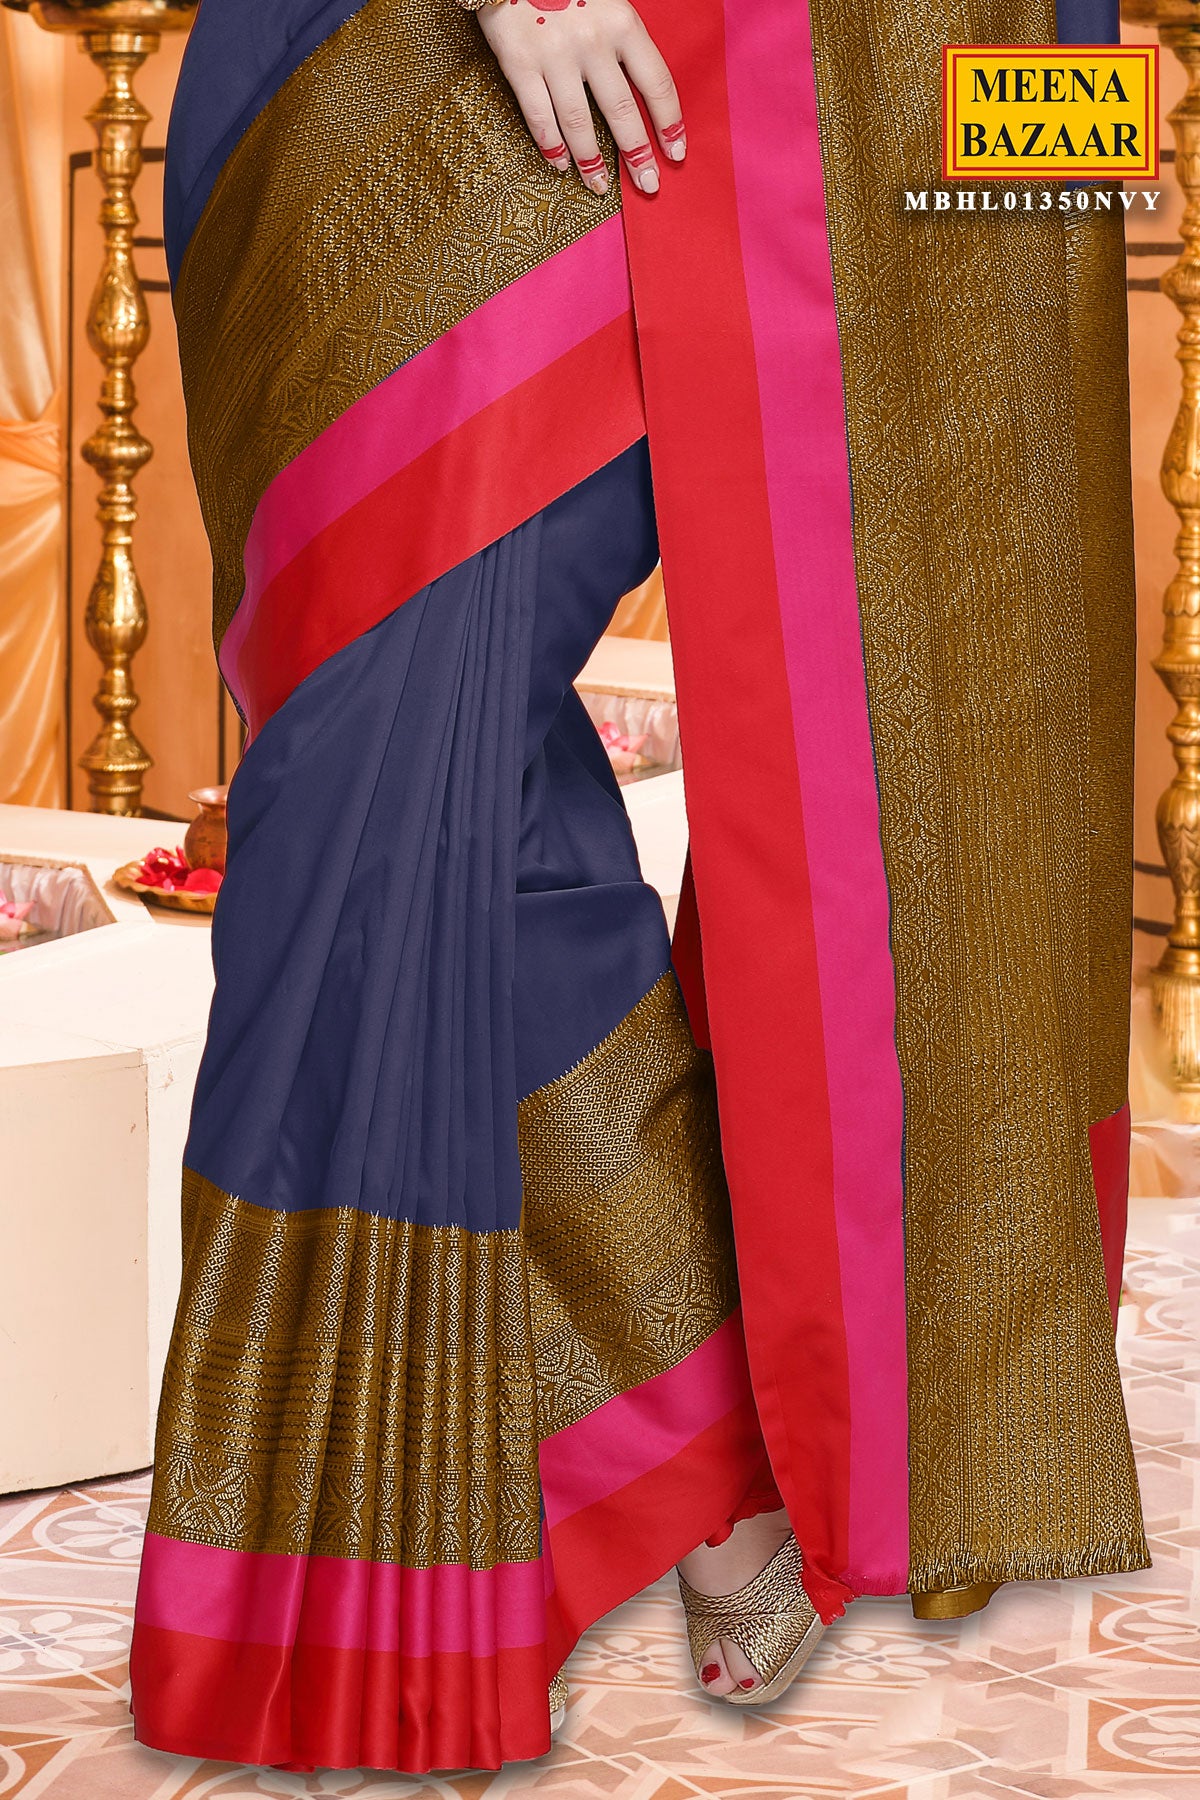 How To Wear A Plain Saree - Buy Pink Sarees, Block Heels Black Sandals with  Gold Clutches Scrapbook Look by Sweet